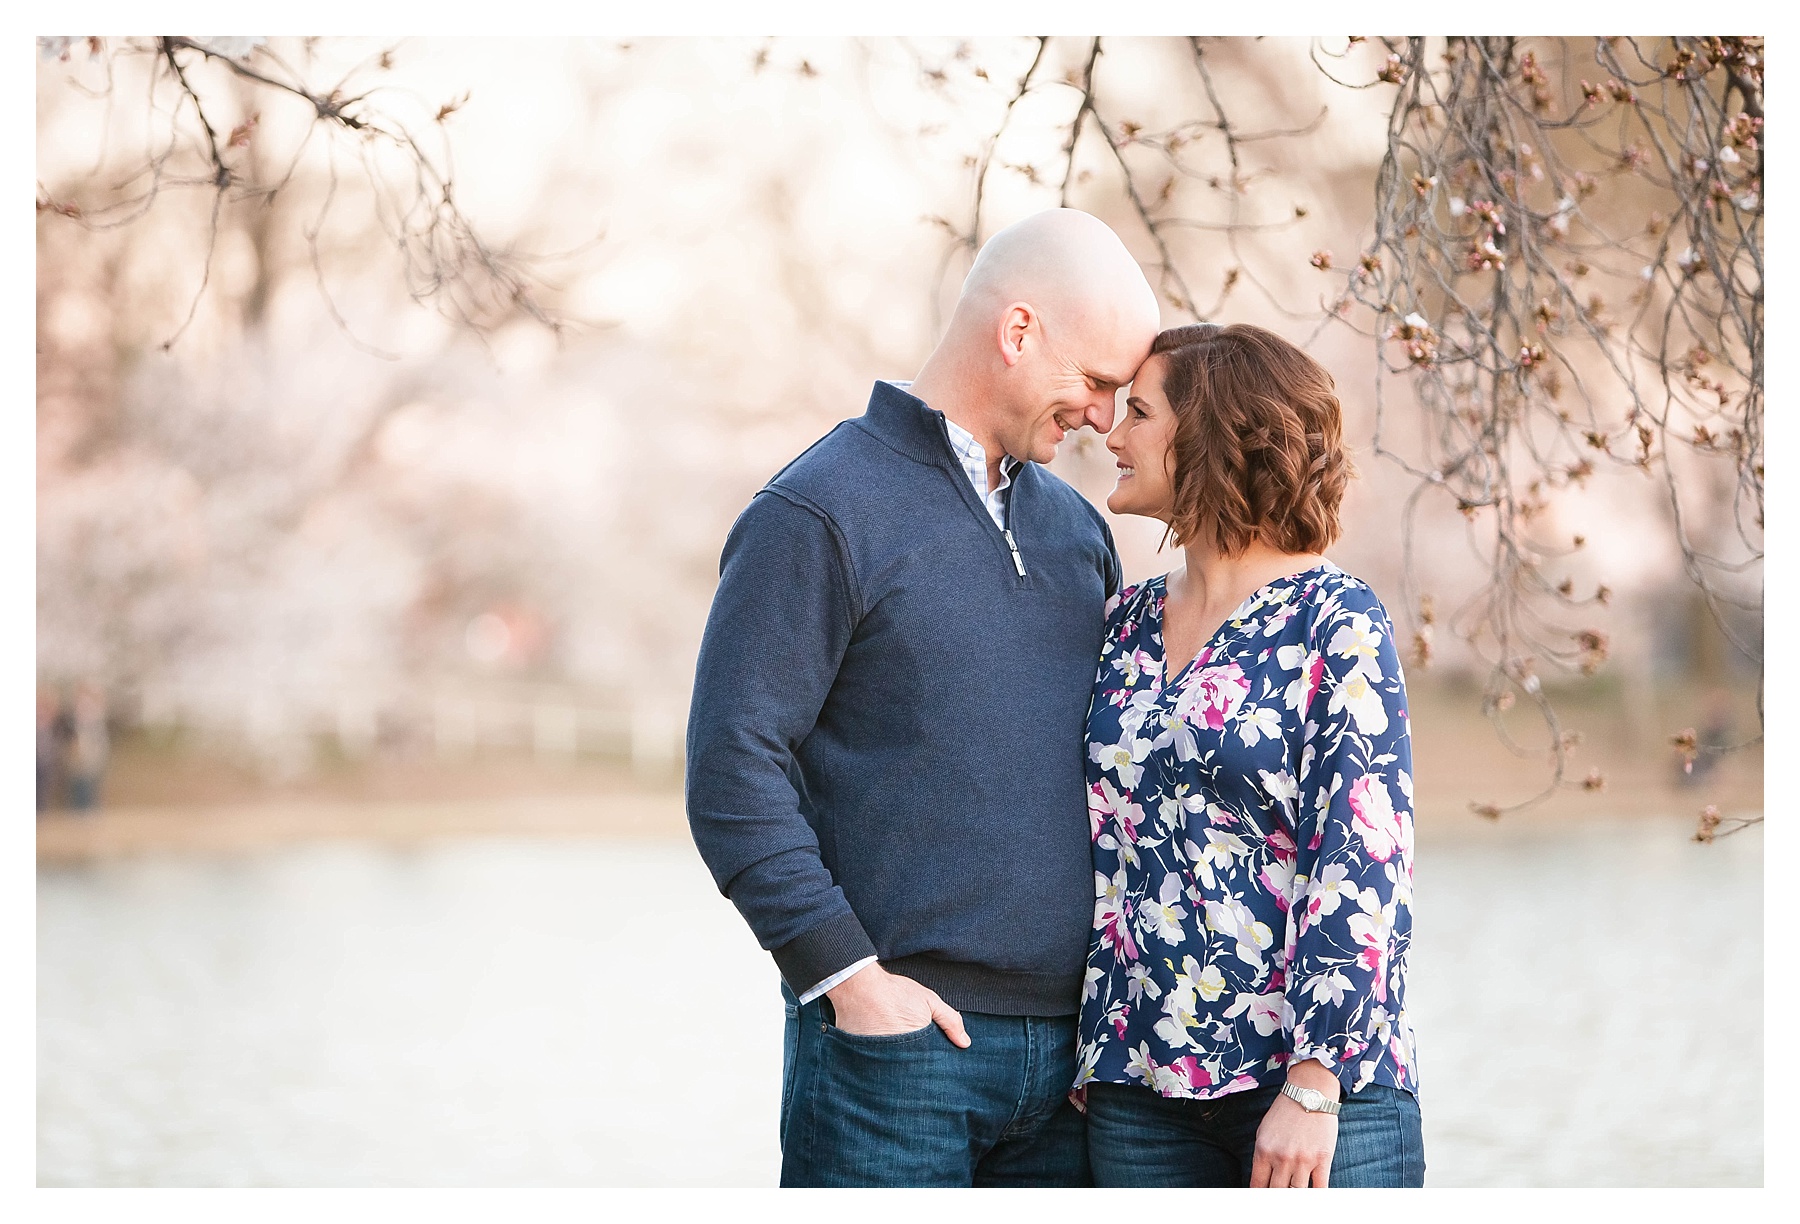 Candice Adelle Photography DC Destination Wedding Photographer Cherry Blossom Engagment Session_0004.jpg